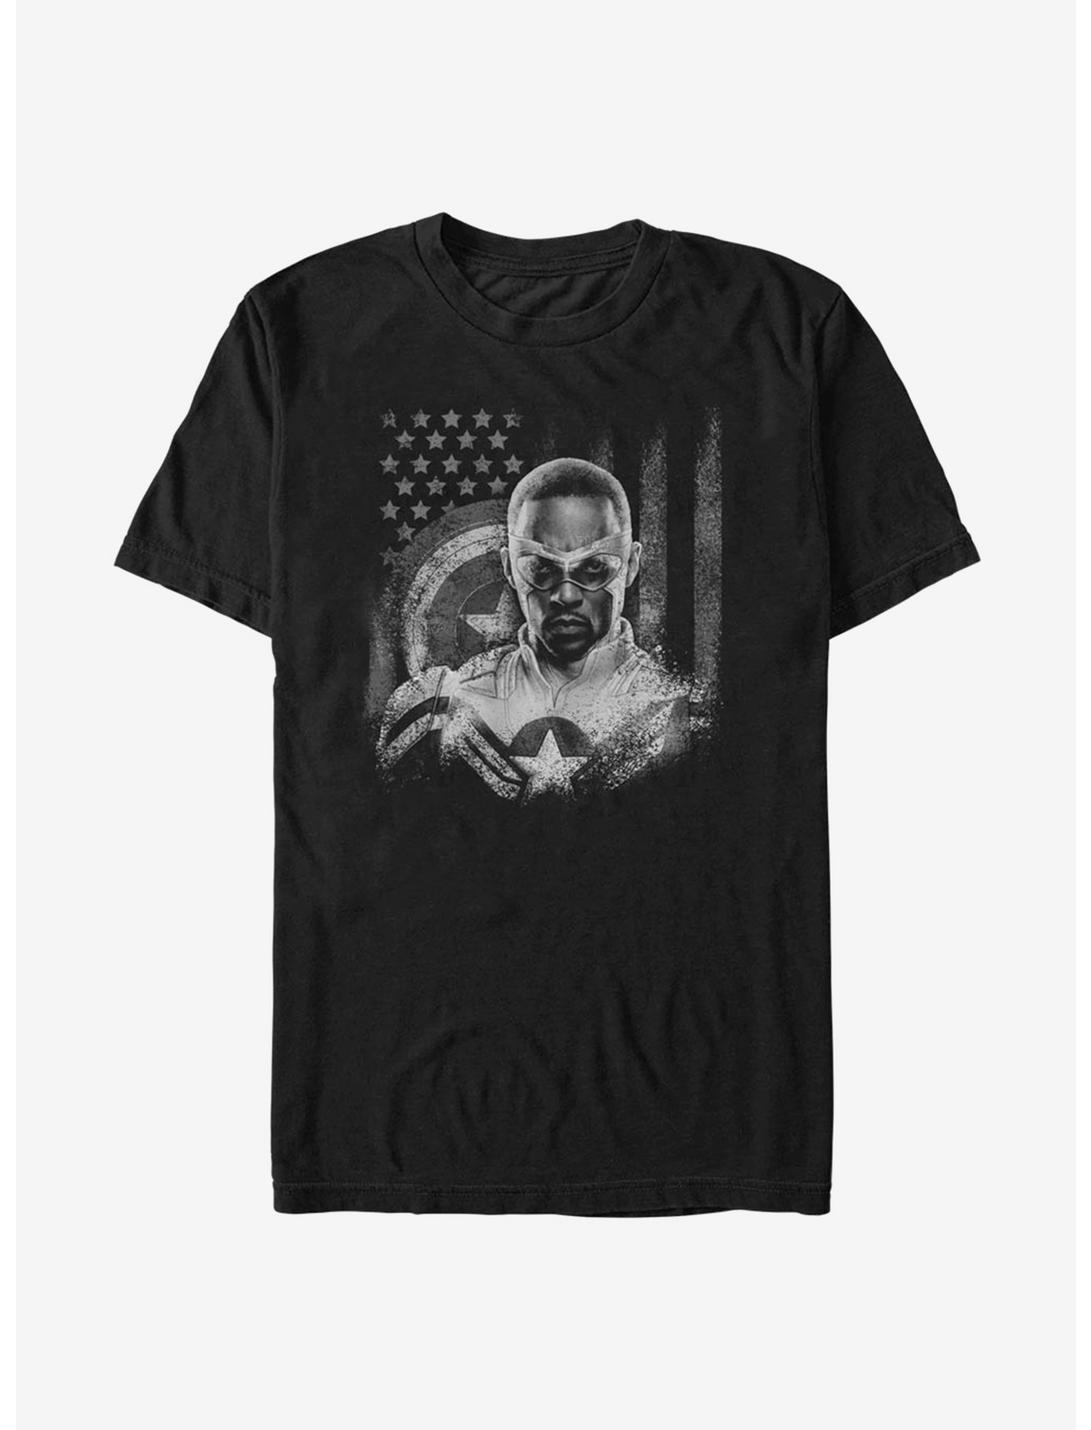 Marvel The Falcon And The Winter Soldier Captain America T-Shirt, BLACK, hi-res